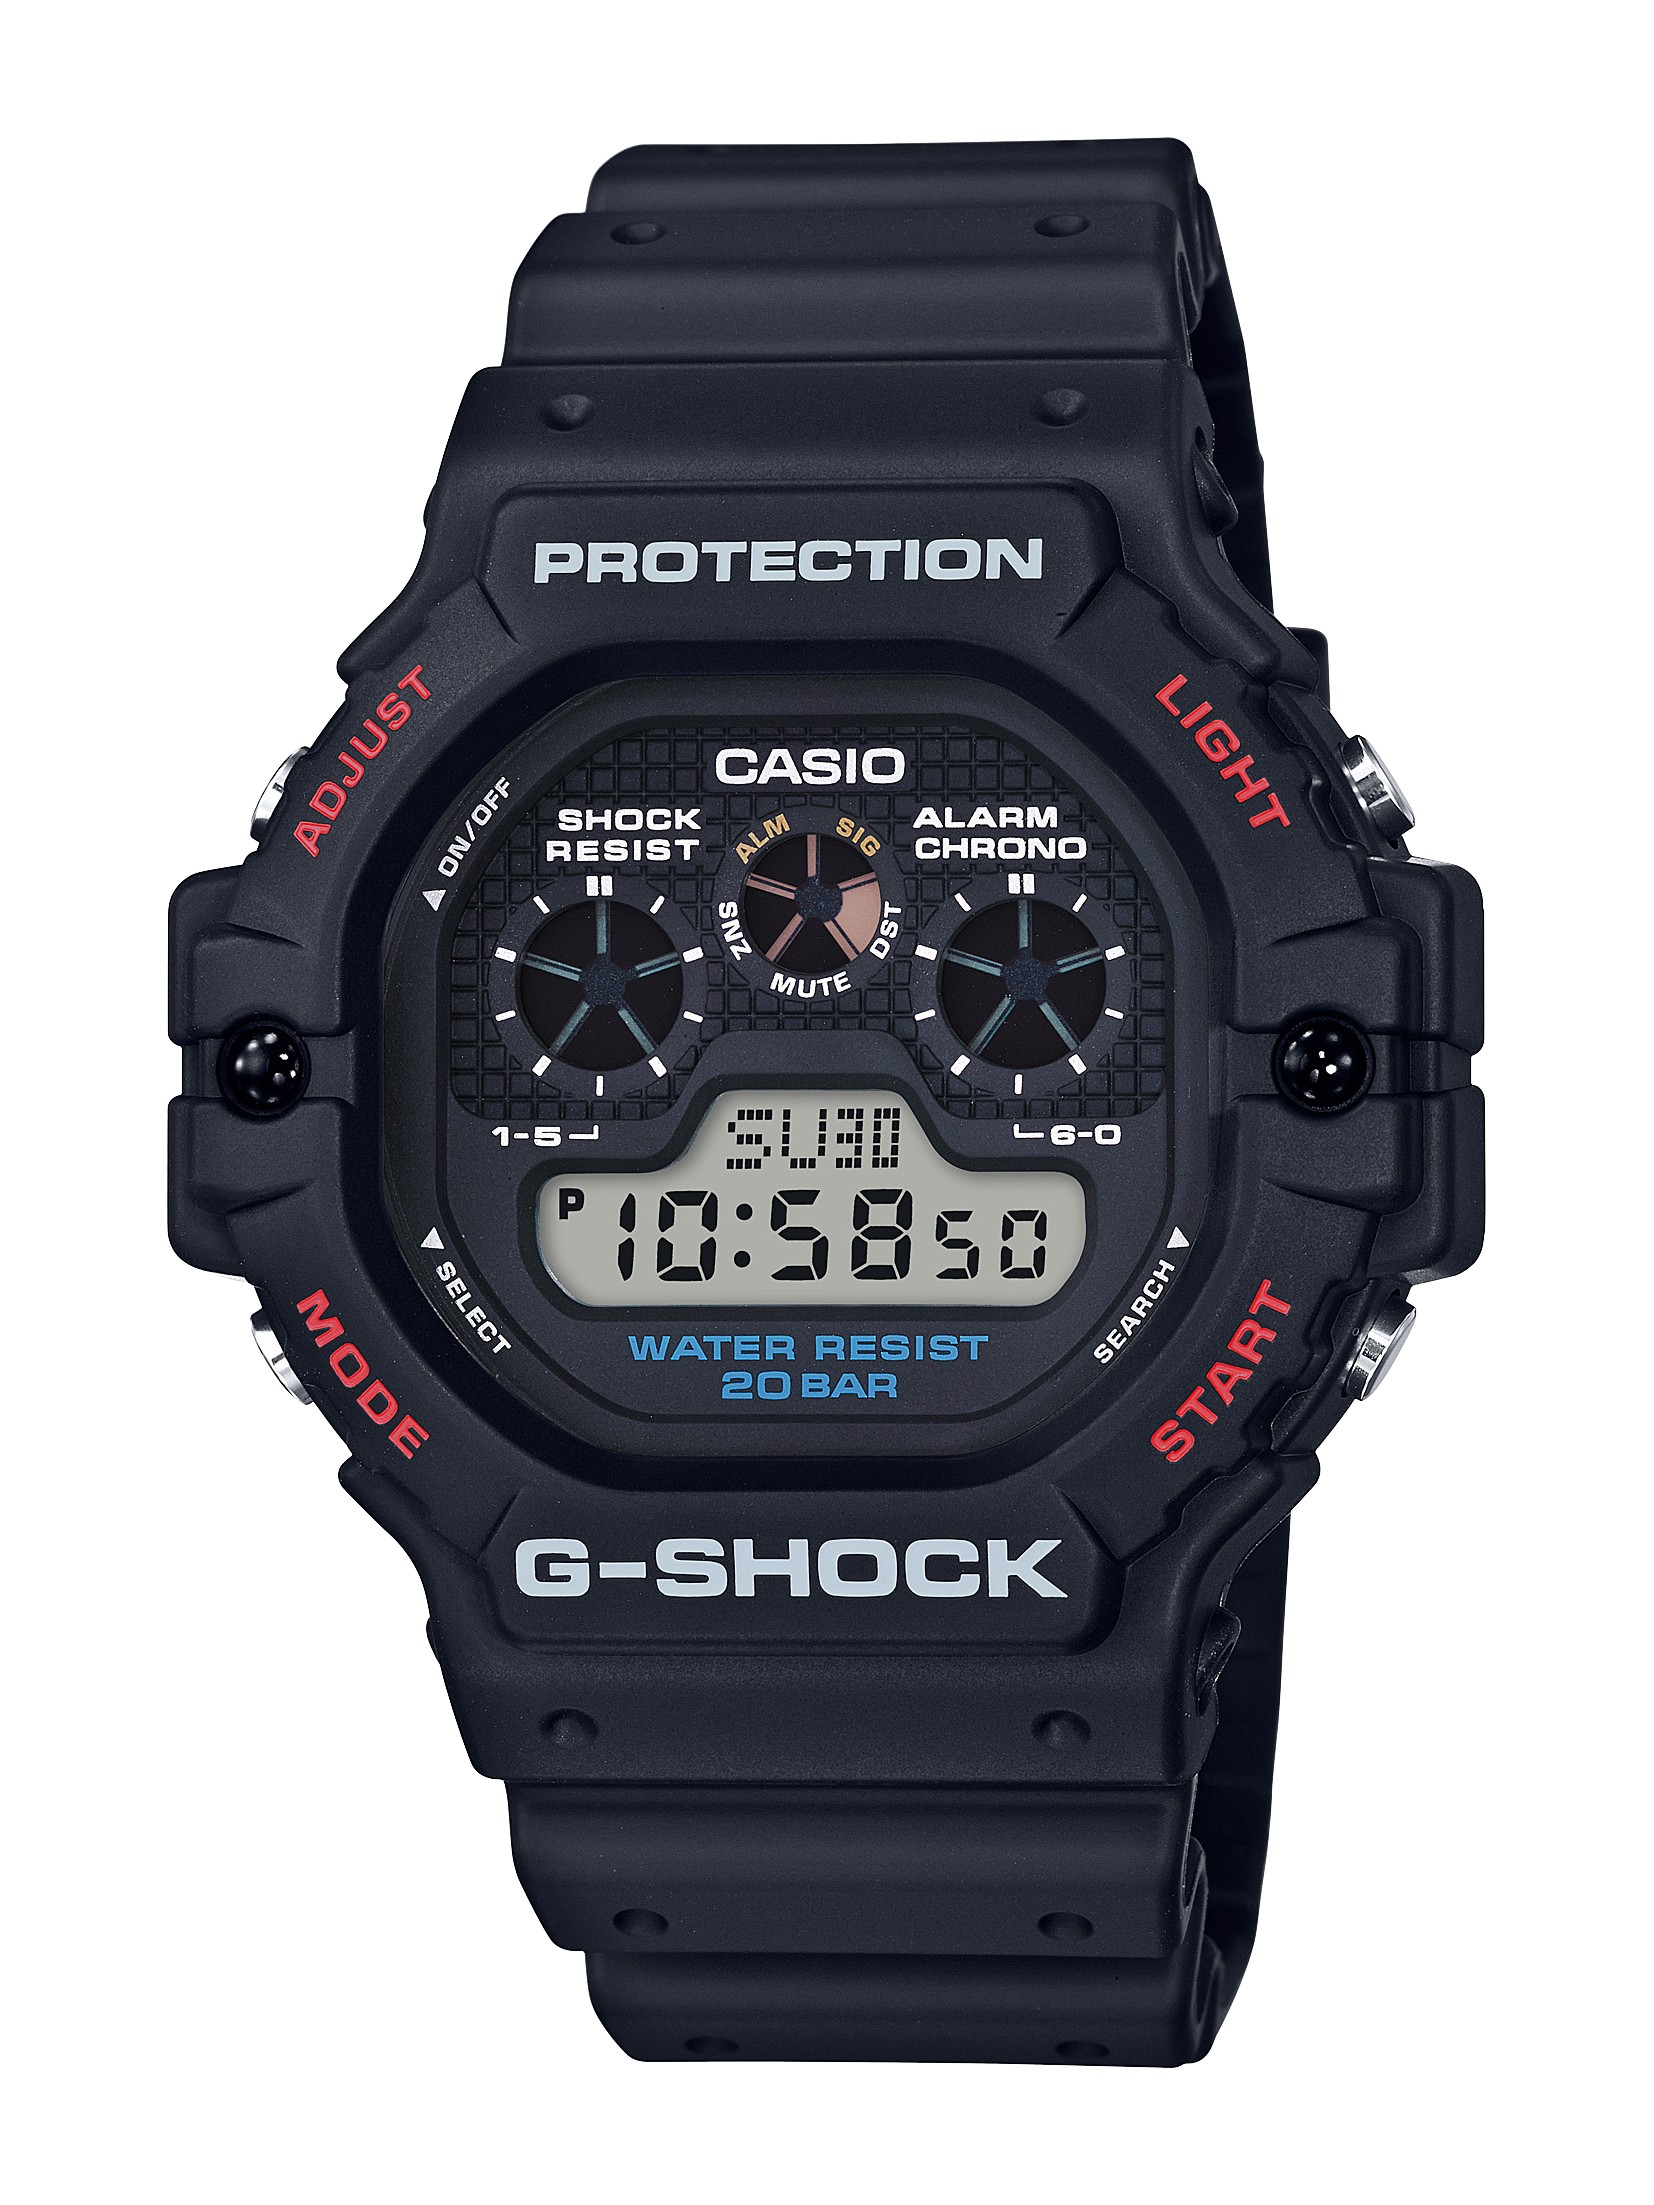 DW-5900-1JF/DW-5900-1JF | DIGITAL | G-SHOCK | COMMON TIME by CHARMY